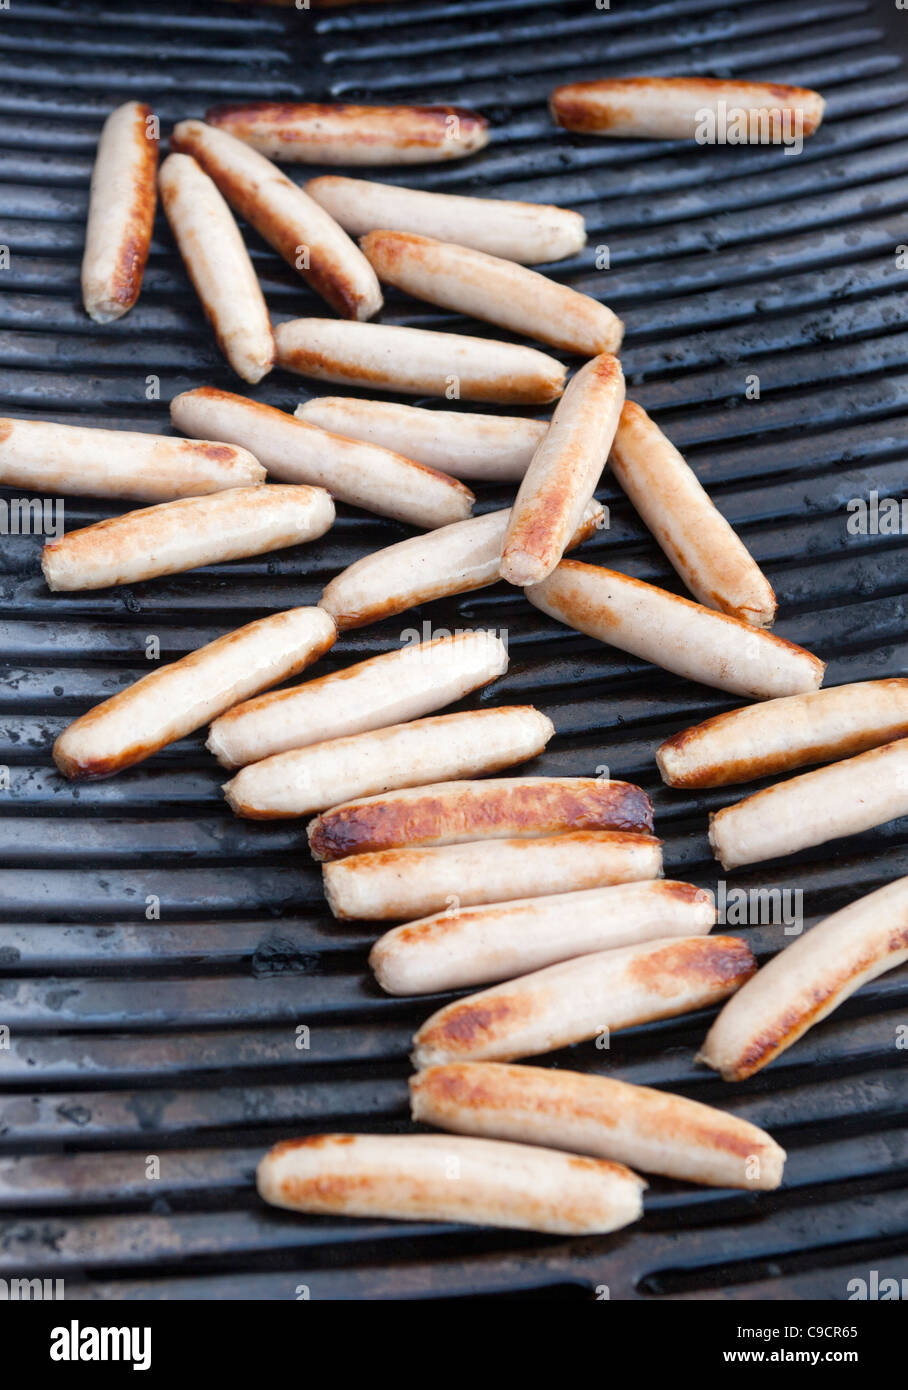 Sausages on Barbeque grill Stock Photo